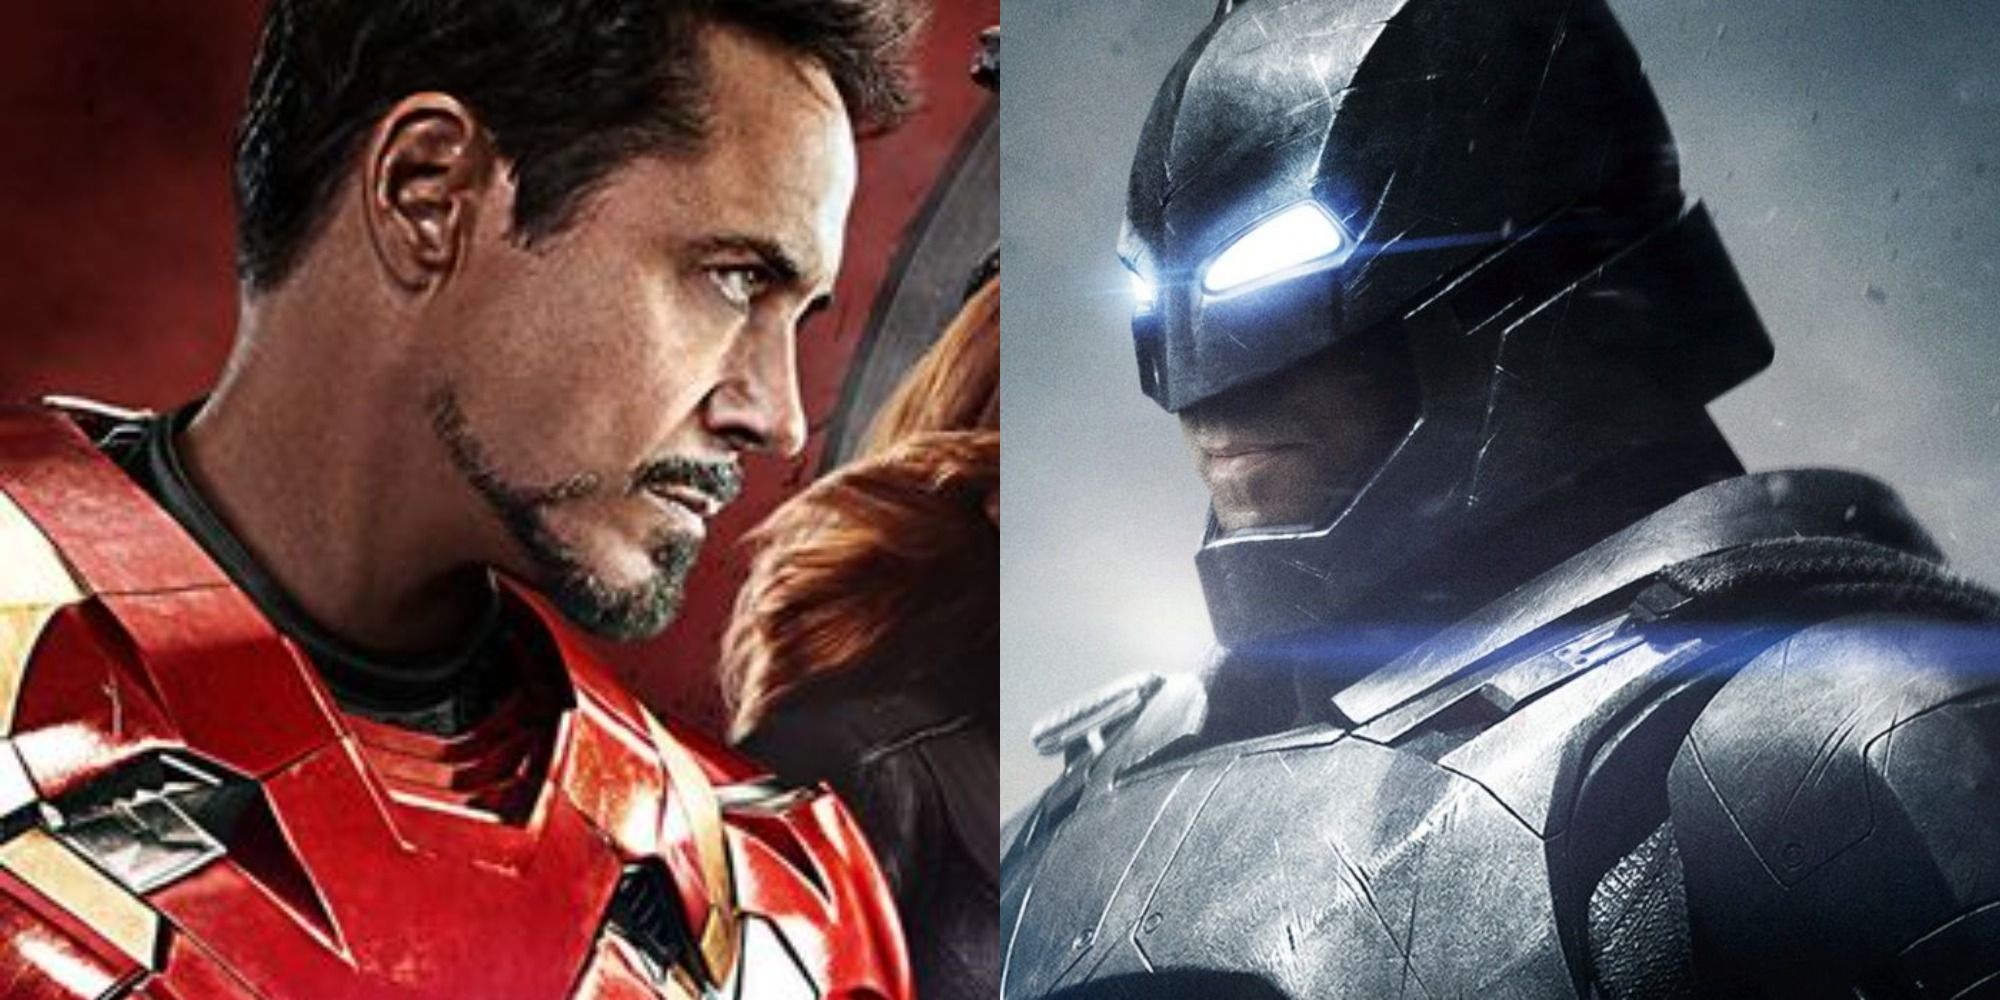 Robert Downey Jr's Iron Man and Ben Afleck's Batman facing each other in side by side images